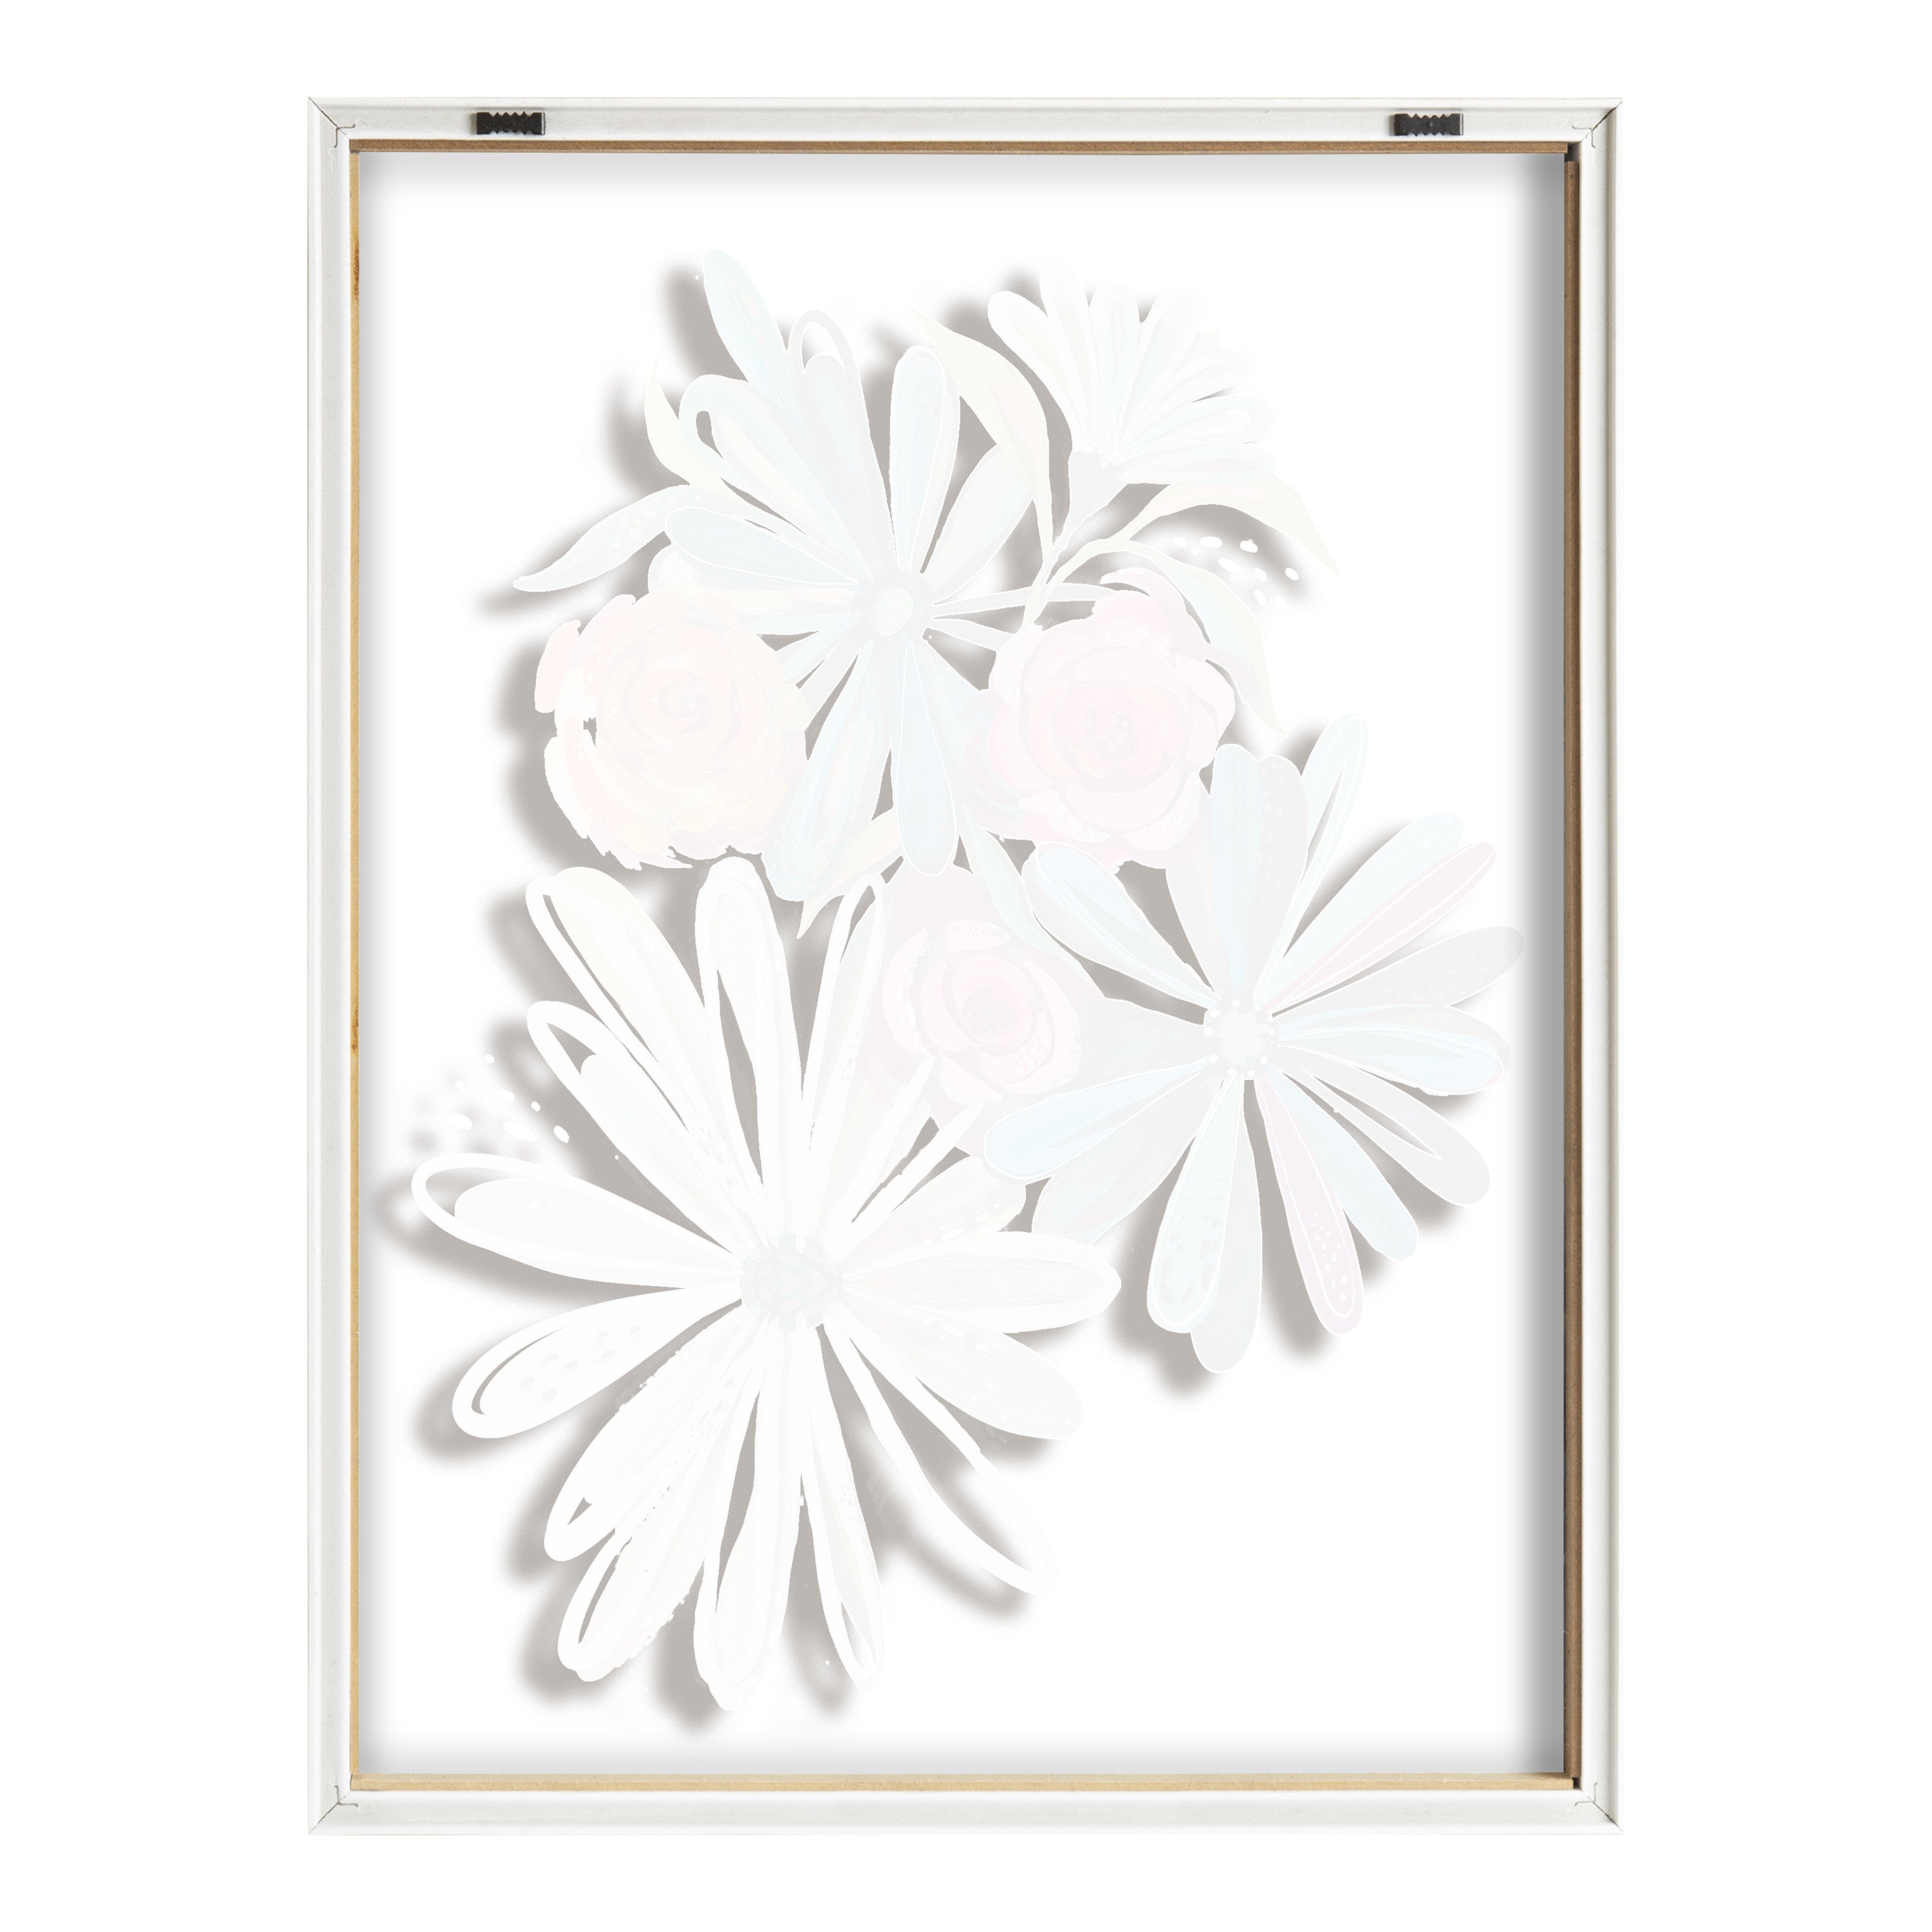 Blake Flowers on Glass 2 Whole Flowers Framed Printed Art by Jessi Raulet of Ettavee